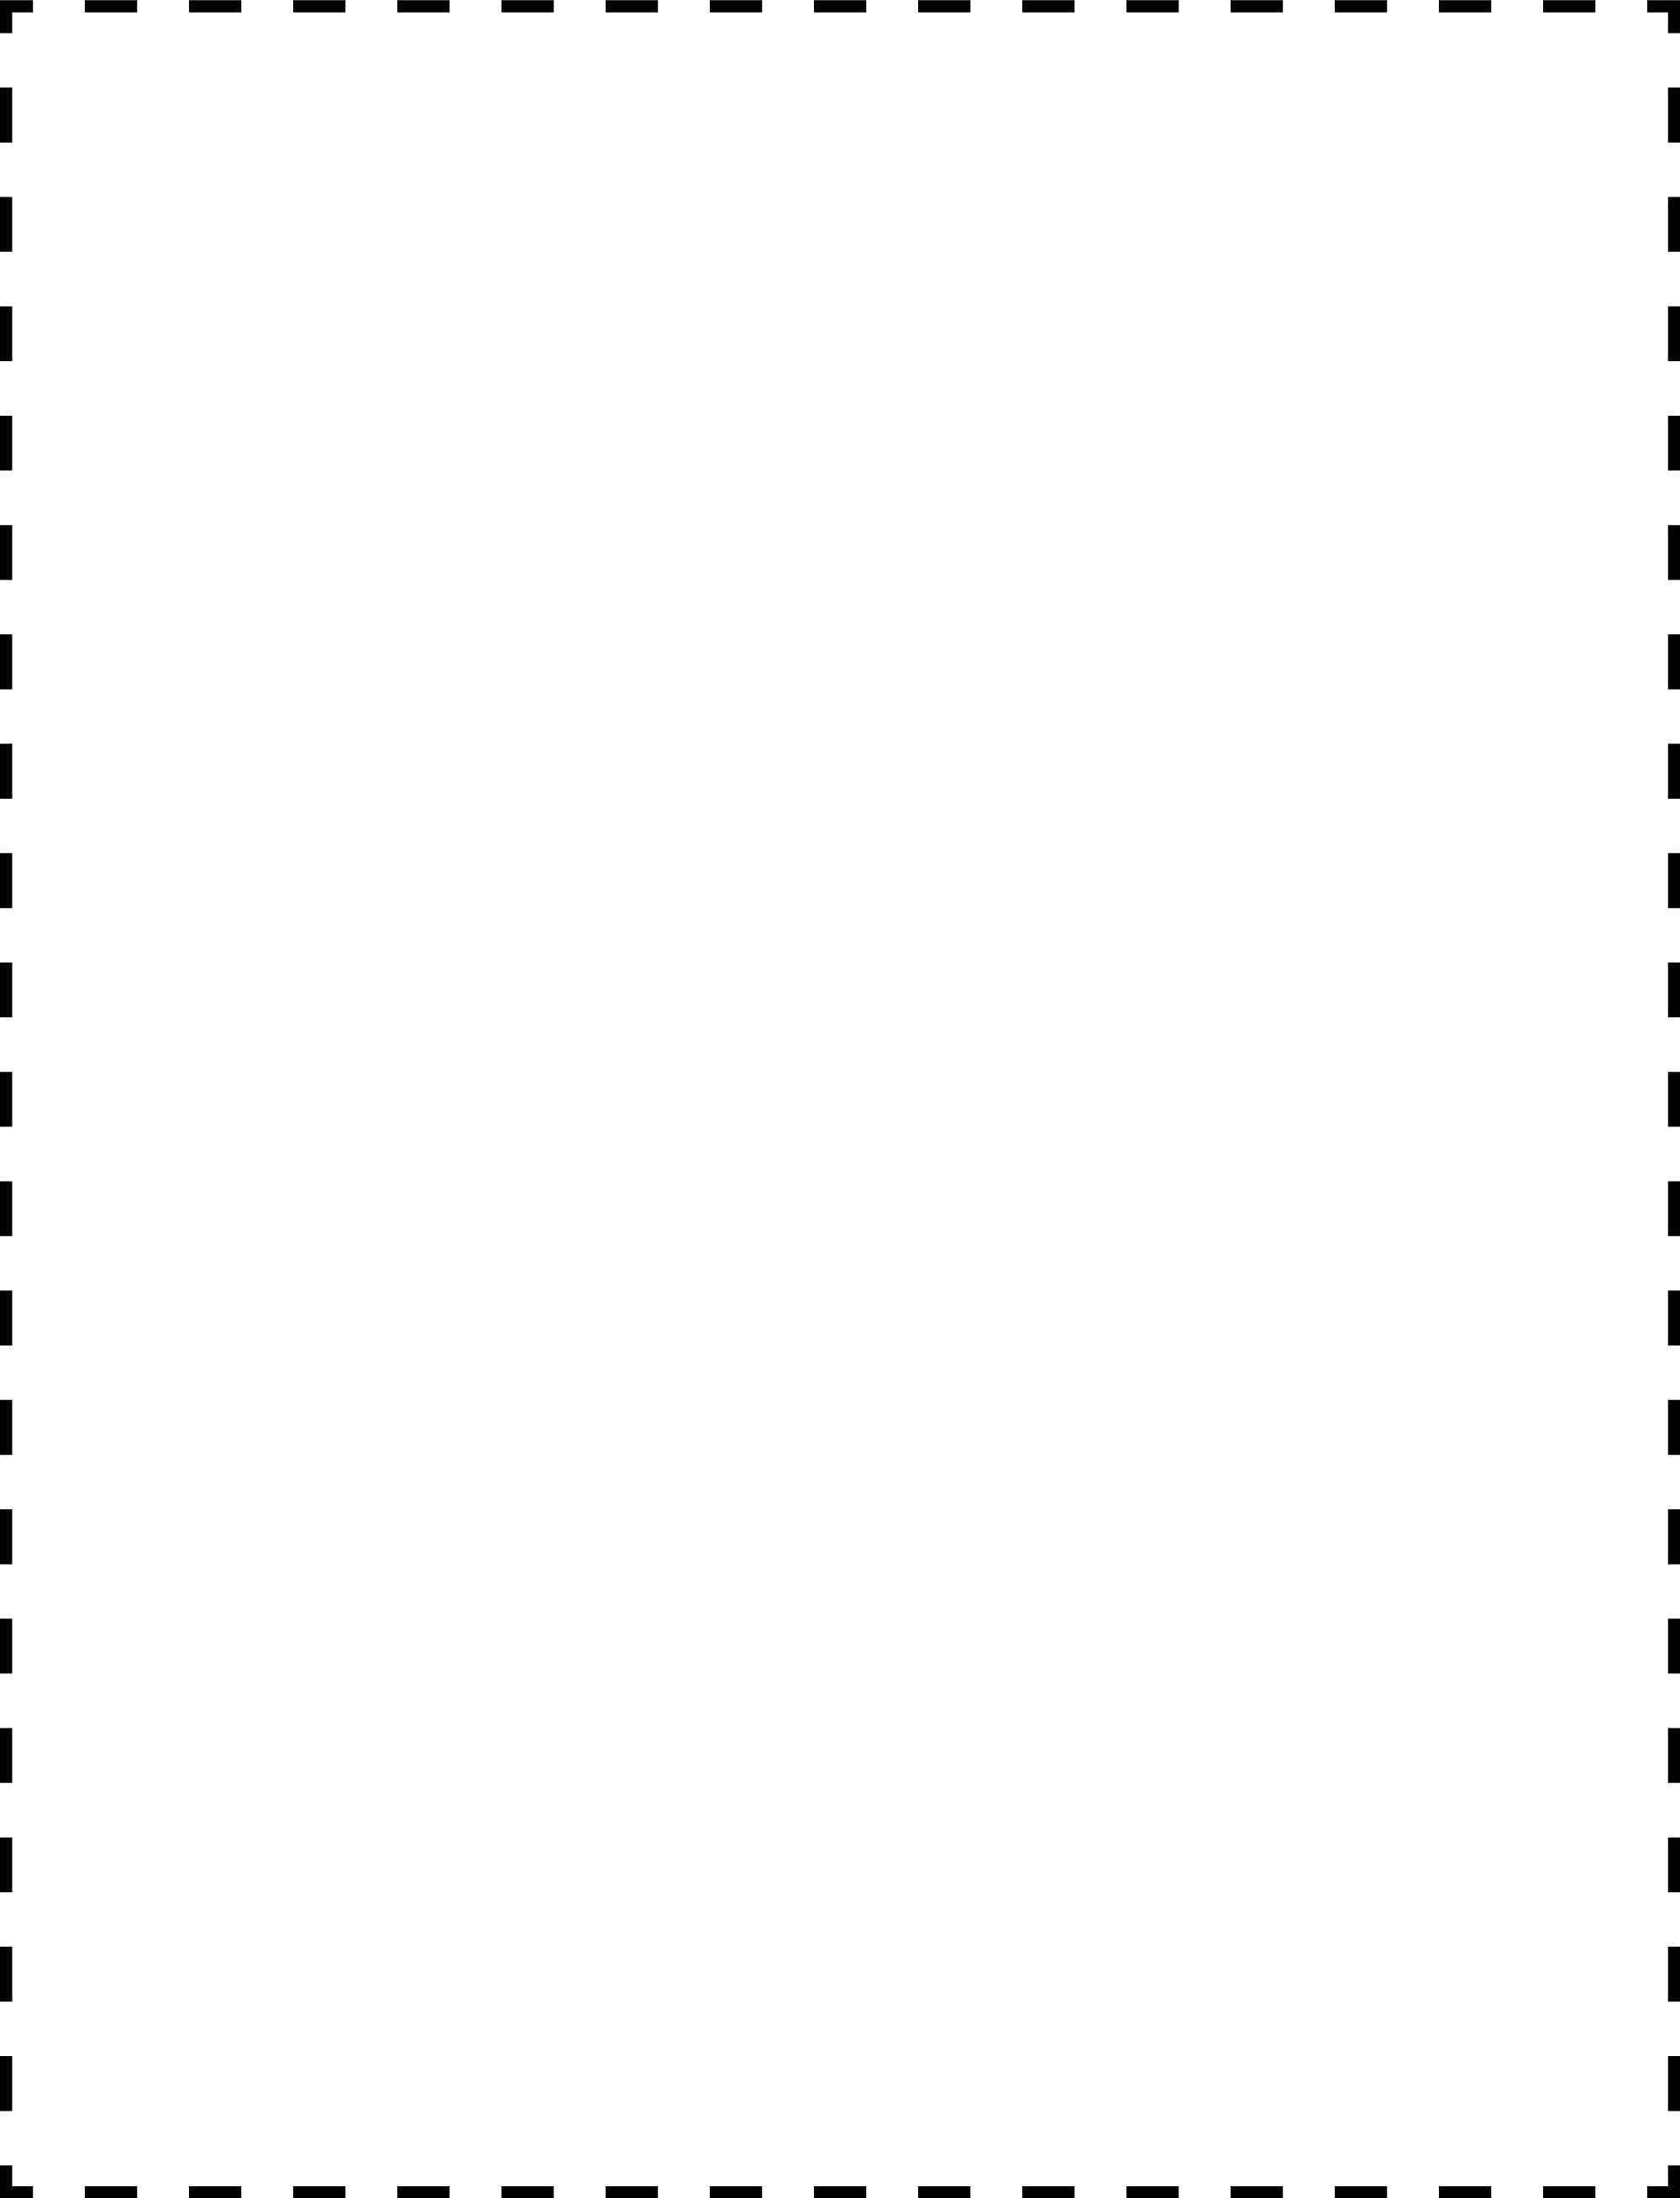 514-2293-coupon-outline-4x5-k.png